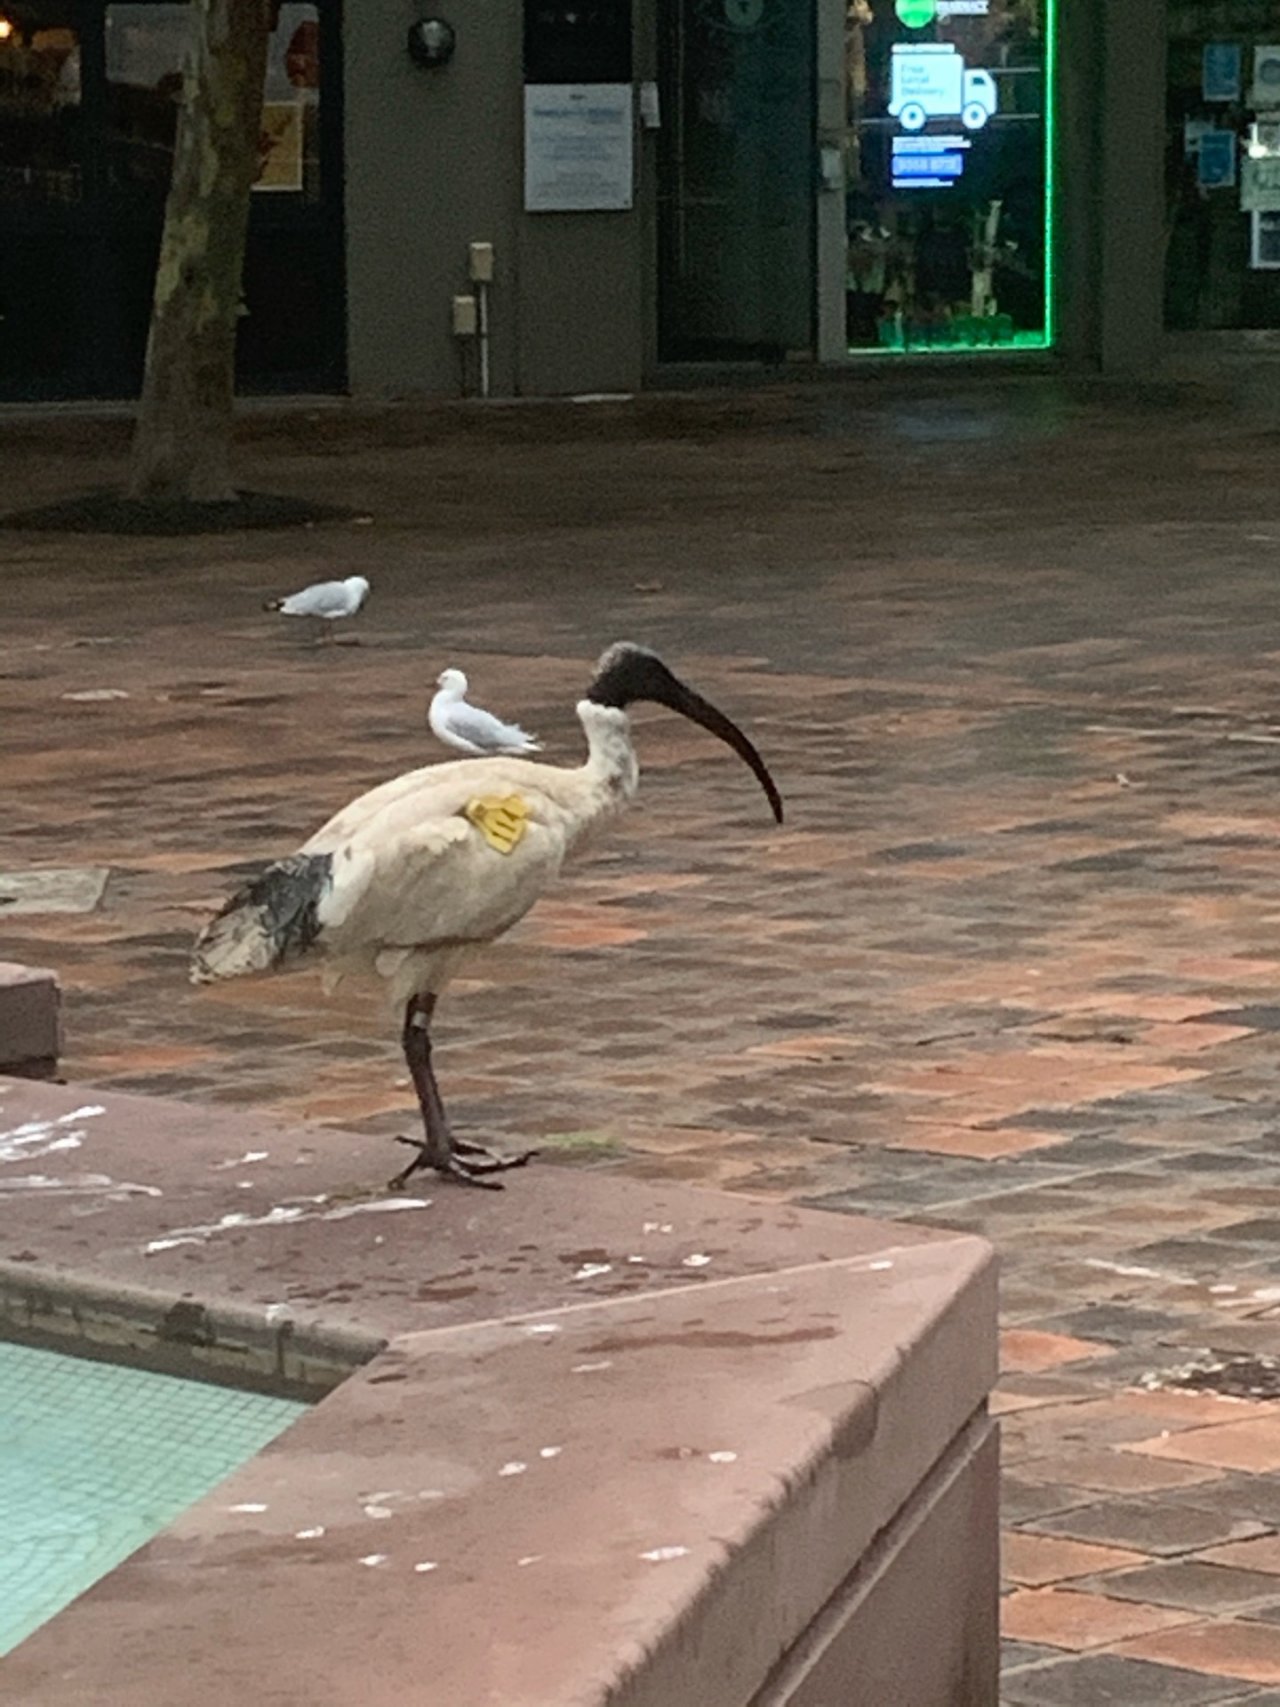 White Ibis in Big City Birds App spotted by Laurie McGuirk on 19.12.2020